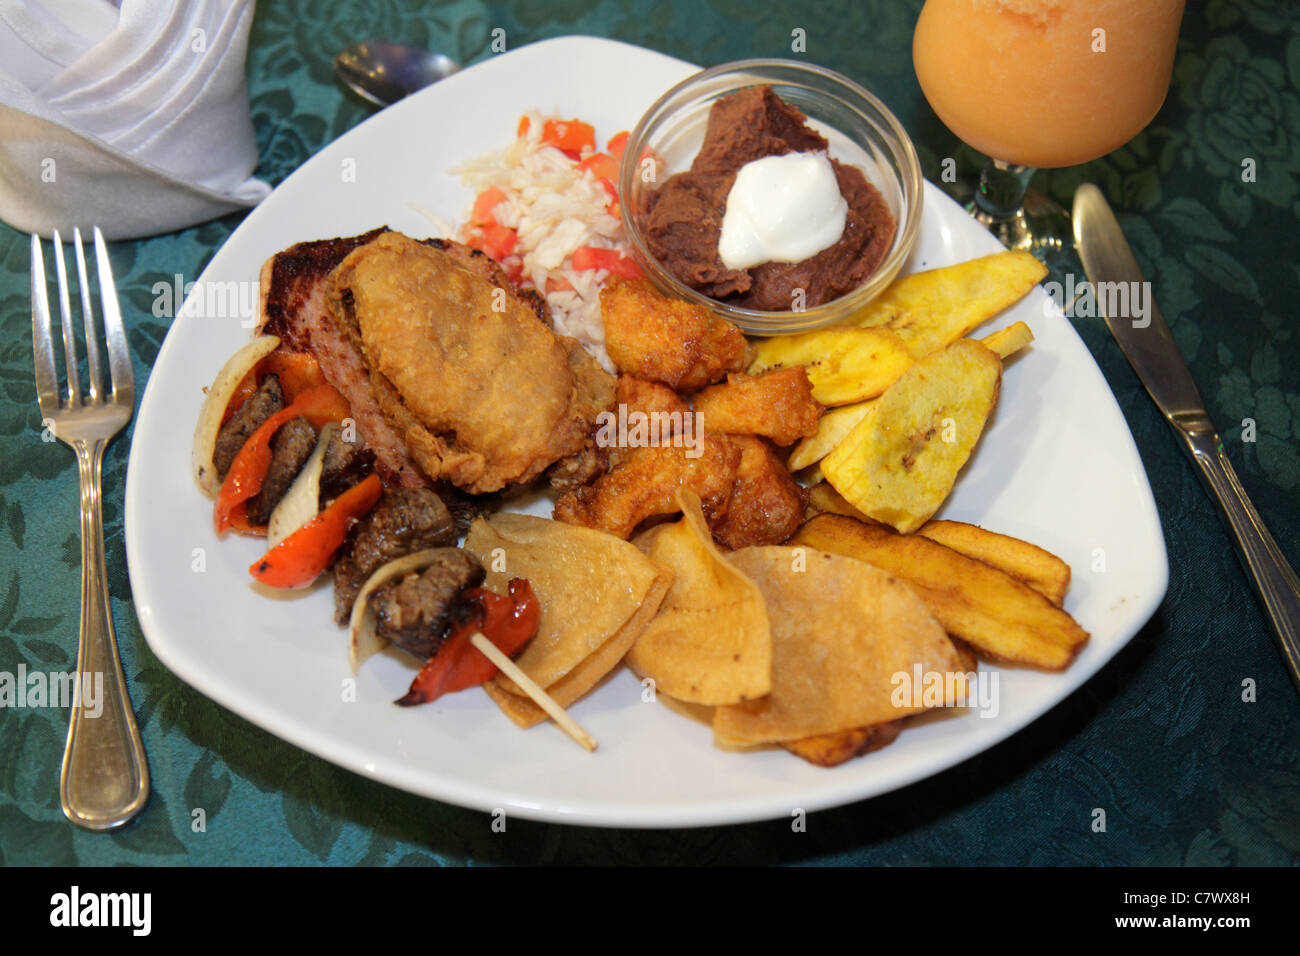 Managua Nicaragua,Los Girasoles,restaurant restaurants food dining cafe cafes,dining,typical food,plate,dish,dinnerware,fork,beef,plantain,tortilla ch Stock Photo